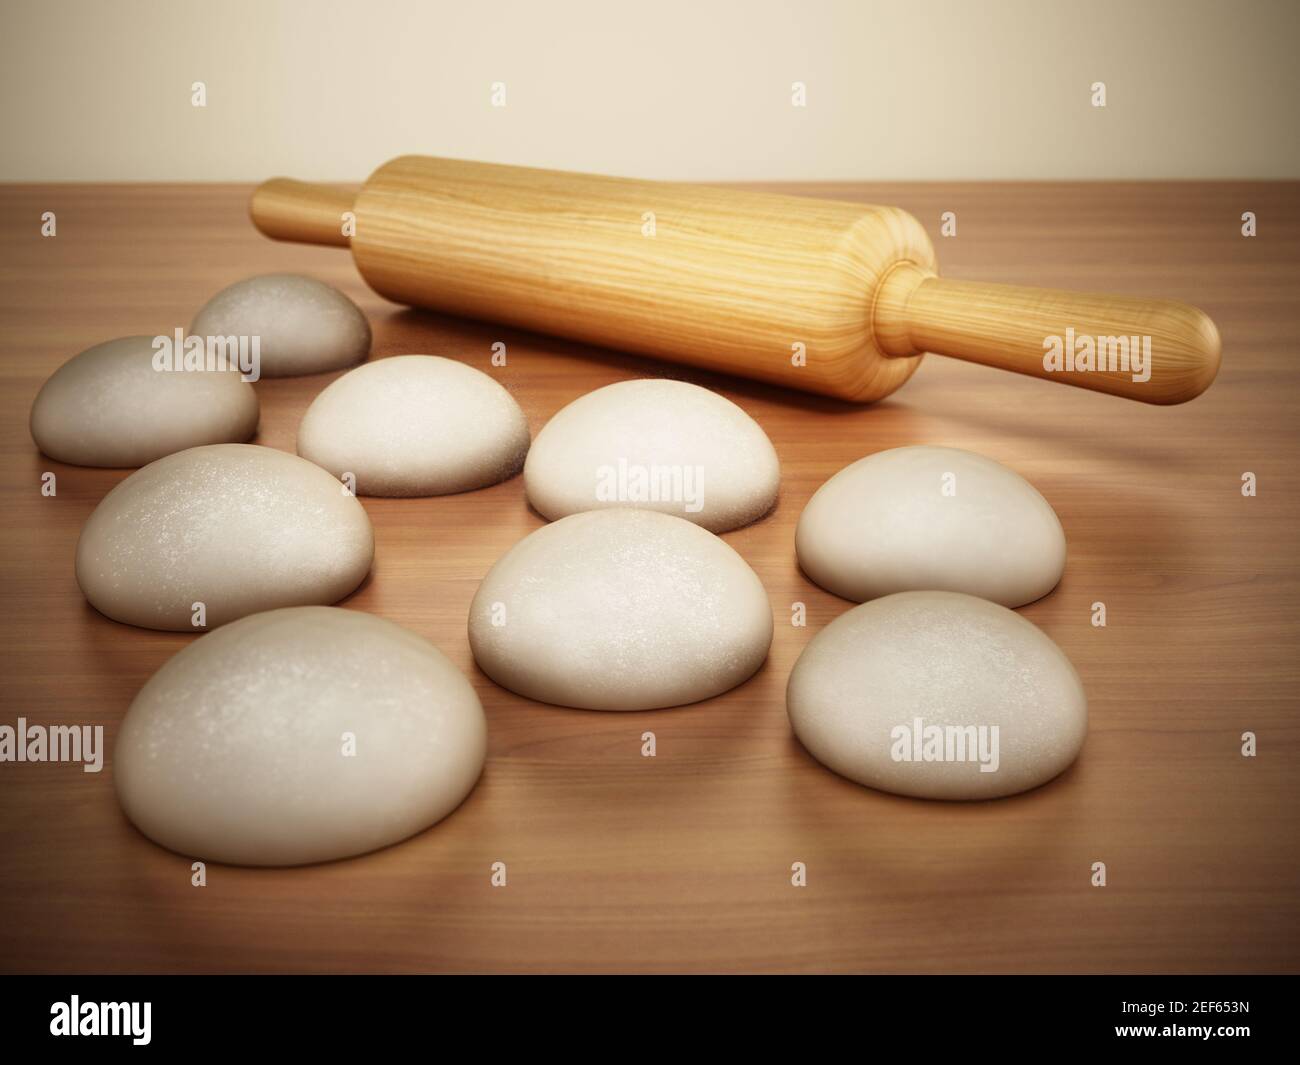 Rolling pin and fresh raw doughs standing on the kitchen counter. 3D illustration. Stock Photo